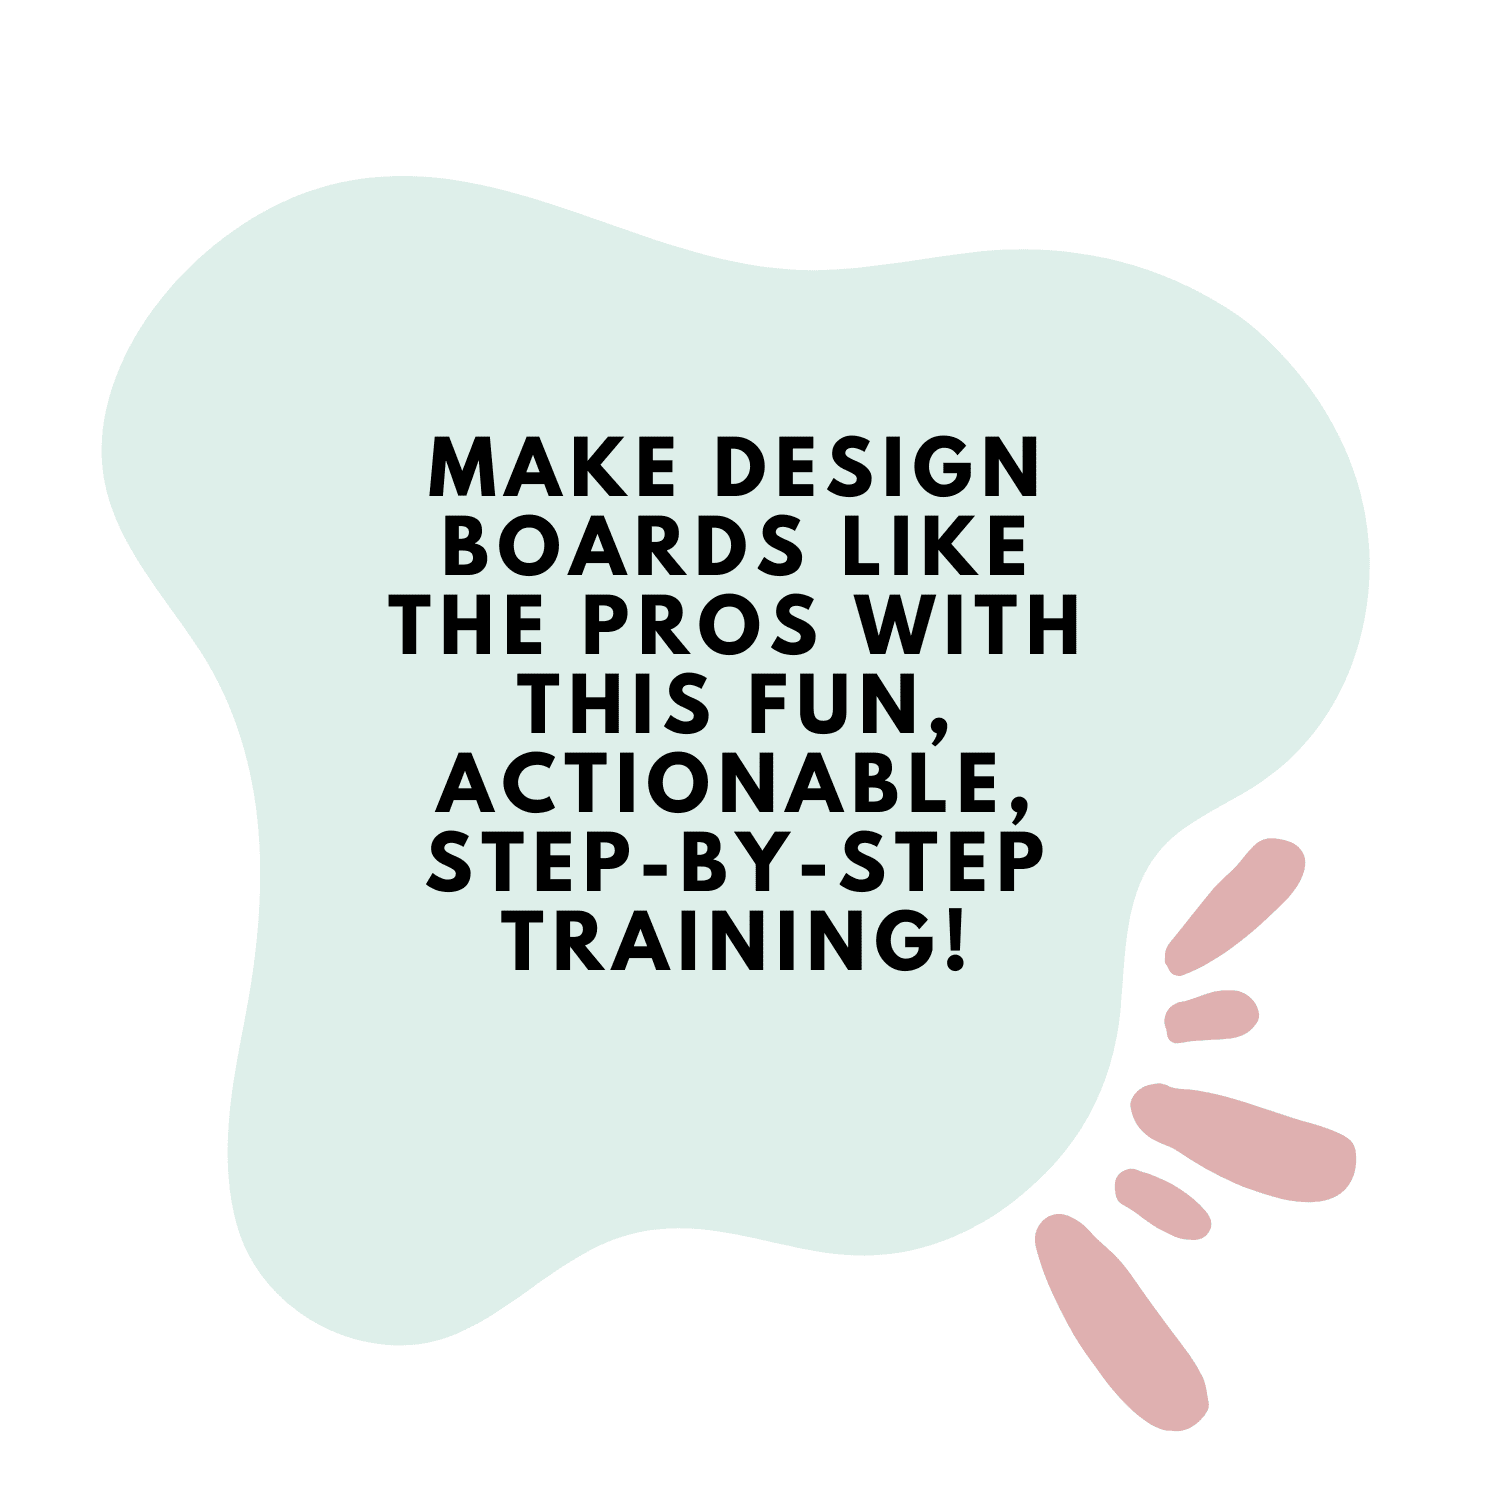 text that says 'make design boards like the pros with this fun, actionable, step-by-step training!"